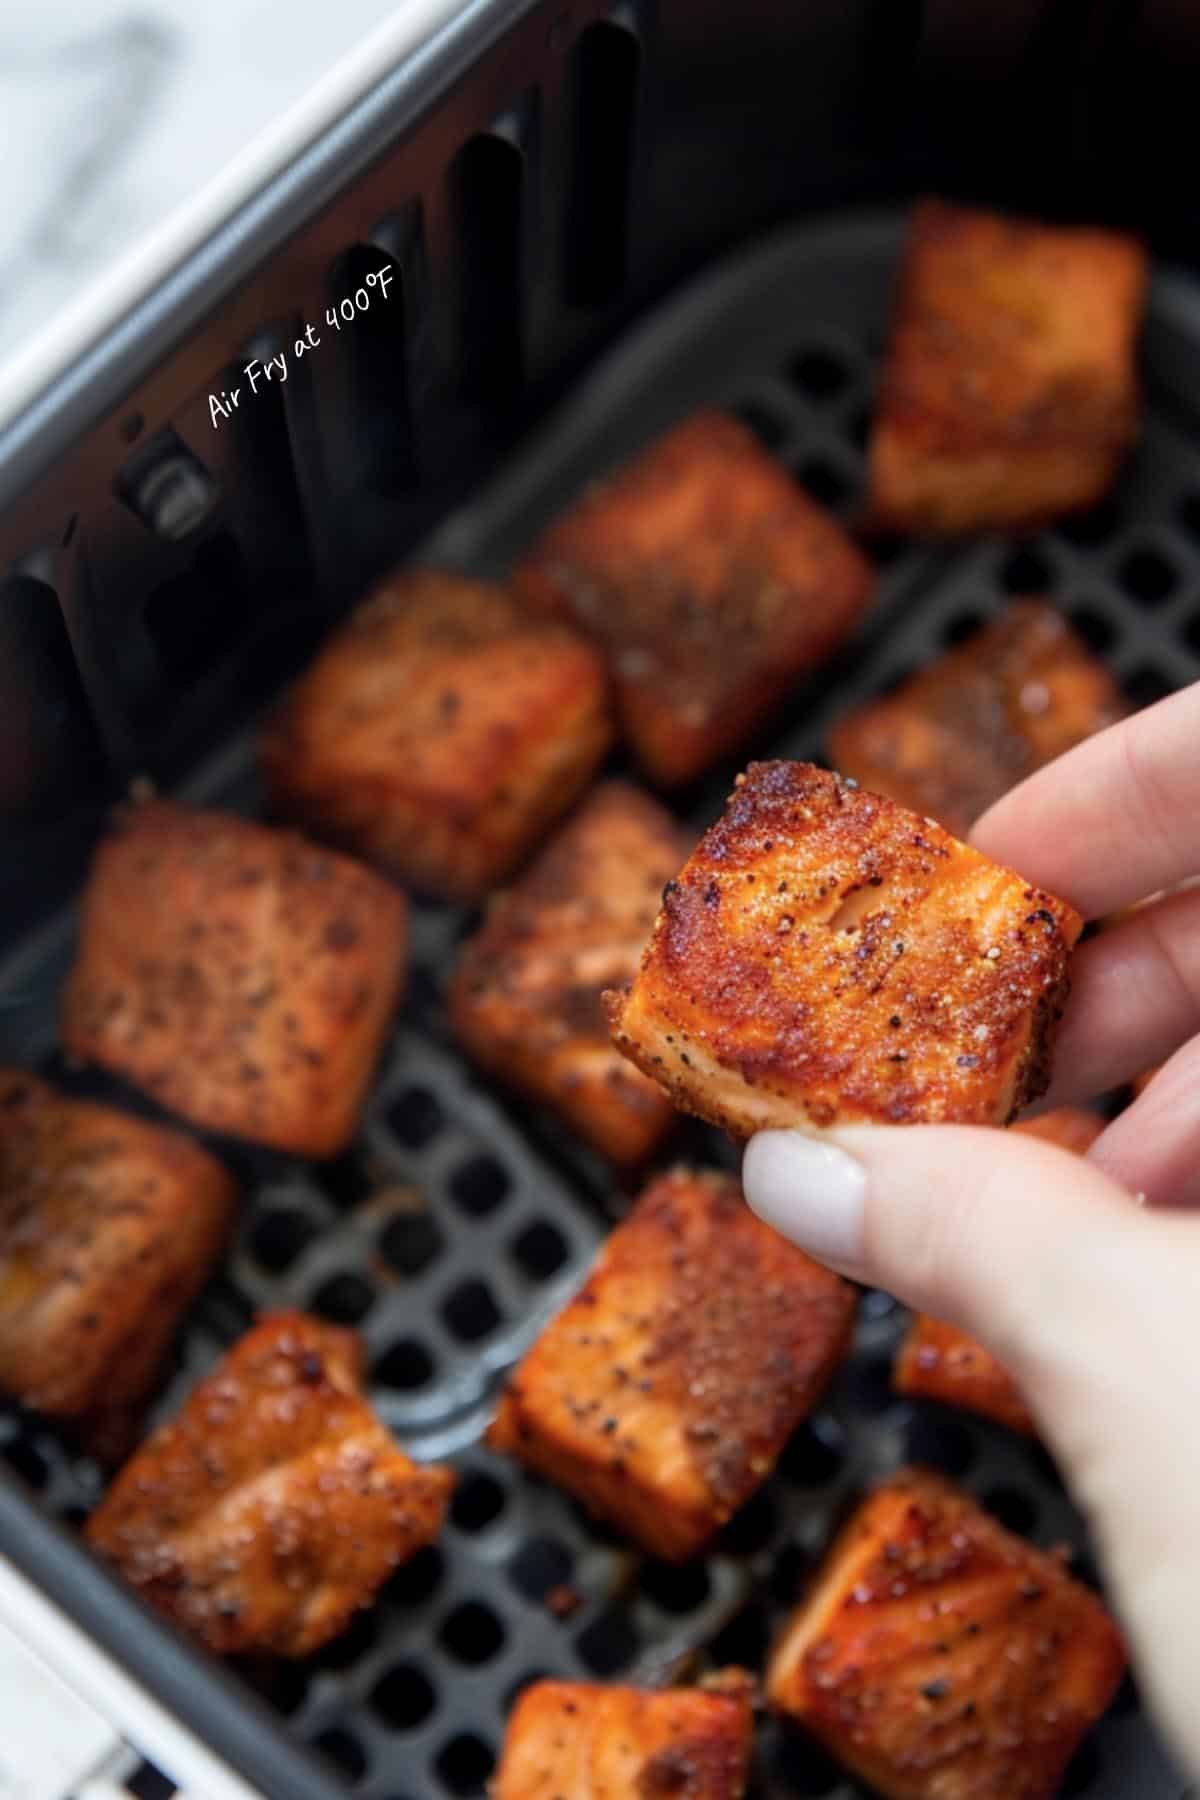 Seasoned salmon cubes placed in the air fryer, ready to transform into crispy, tender bites.